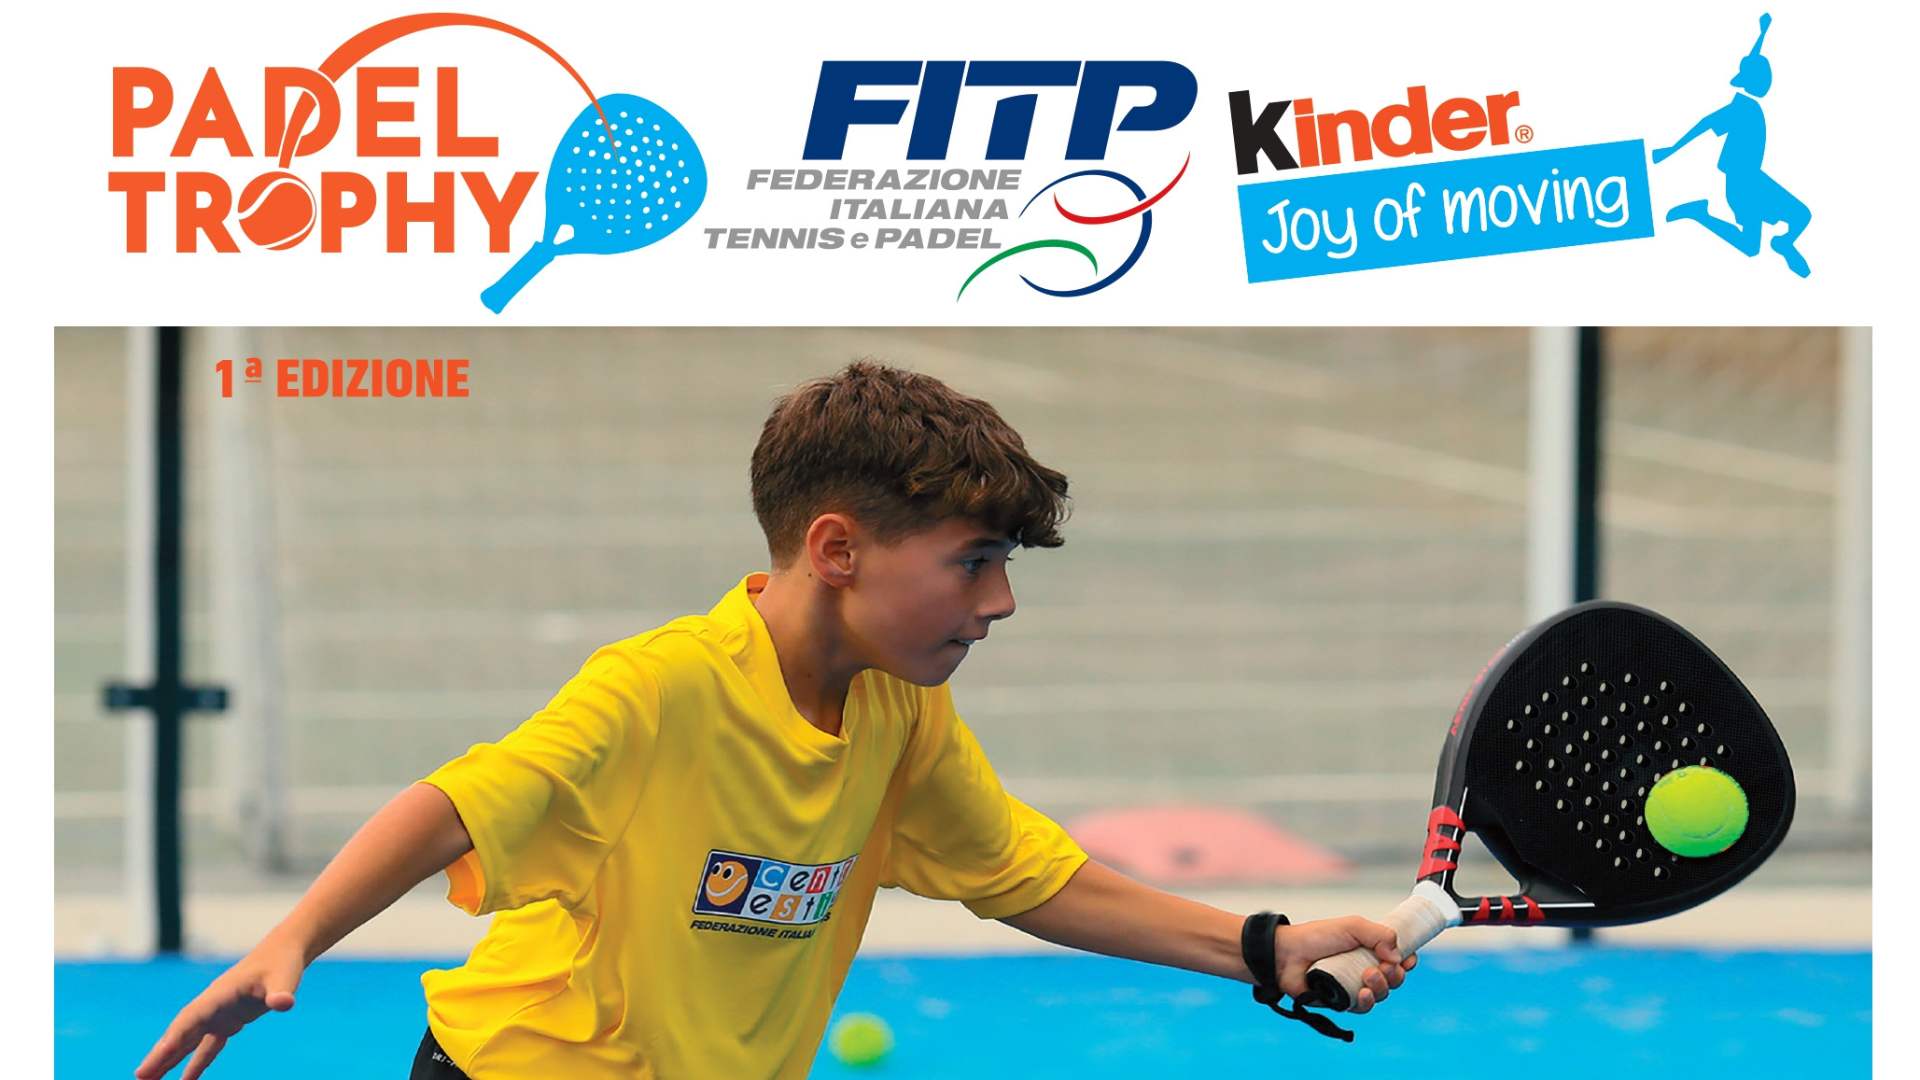 Padel Trophy Fitp Kinder Joy of Moving | Country Club Bologna